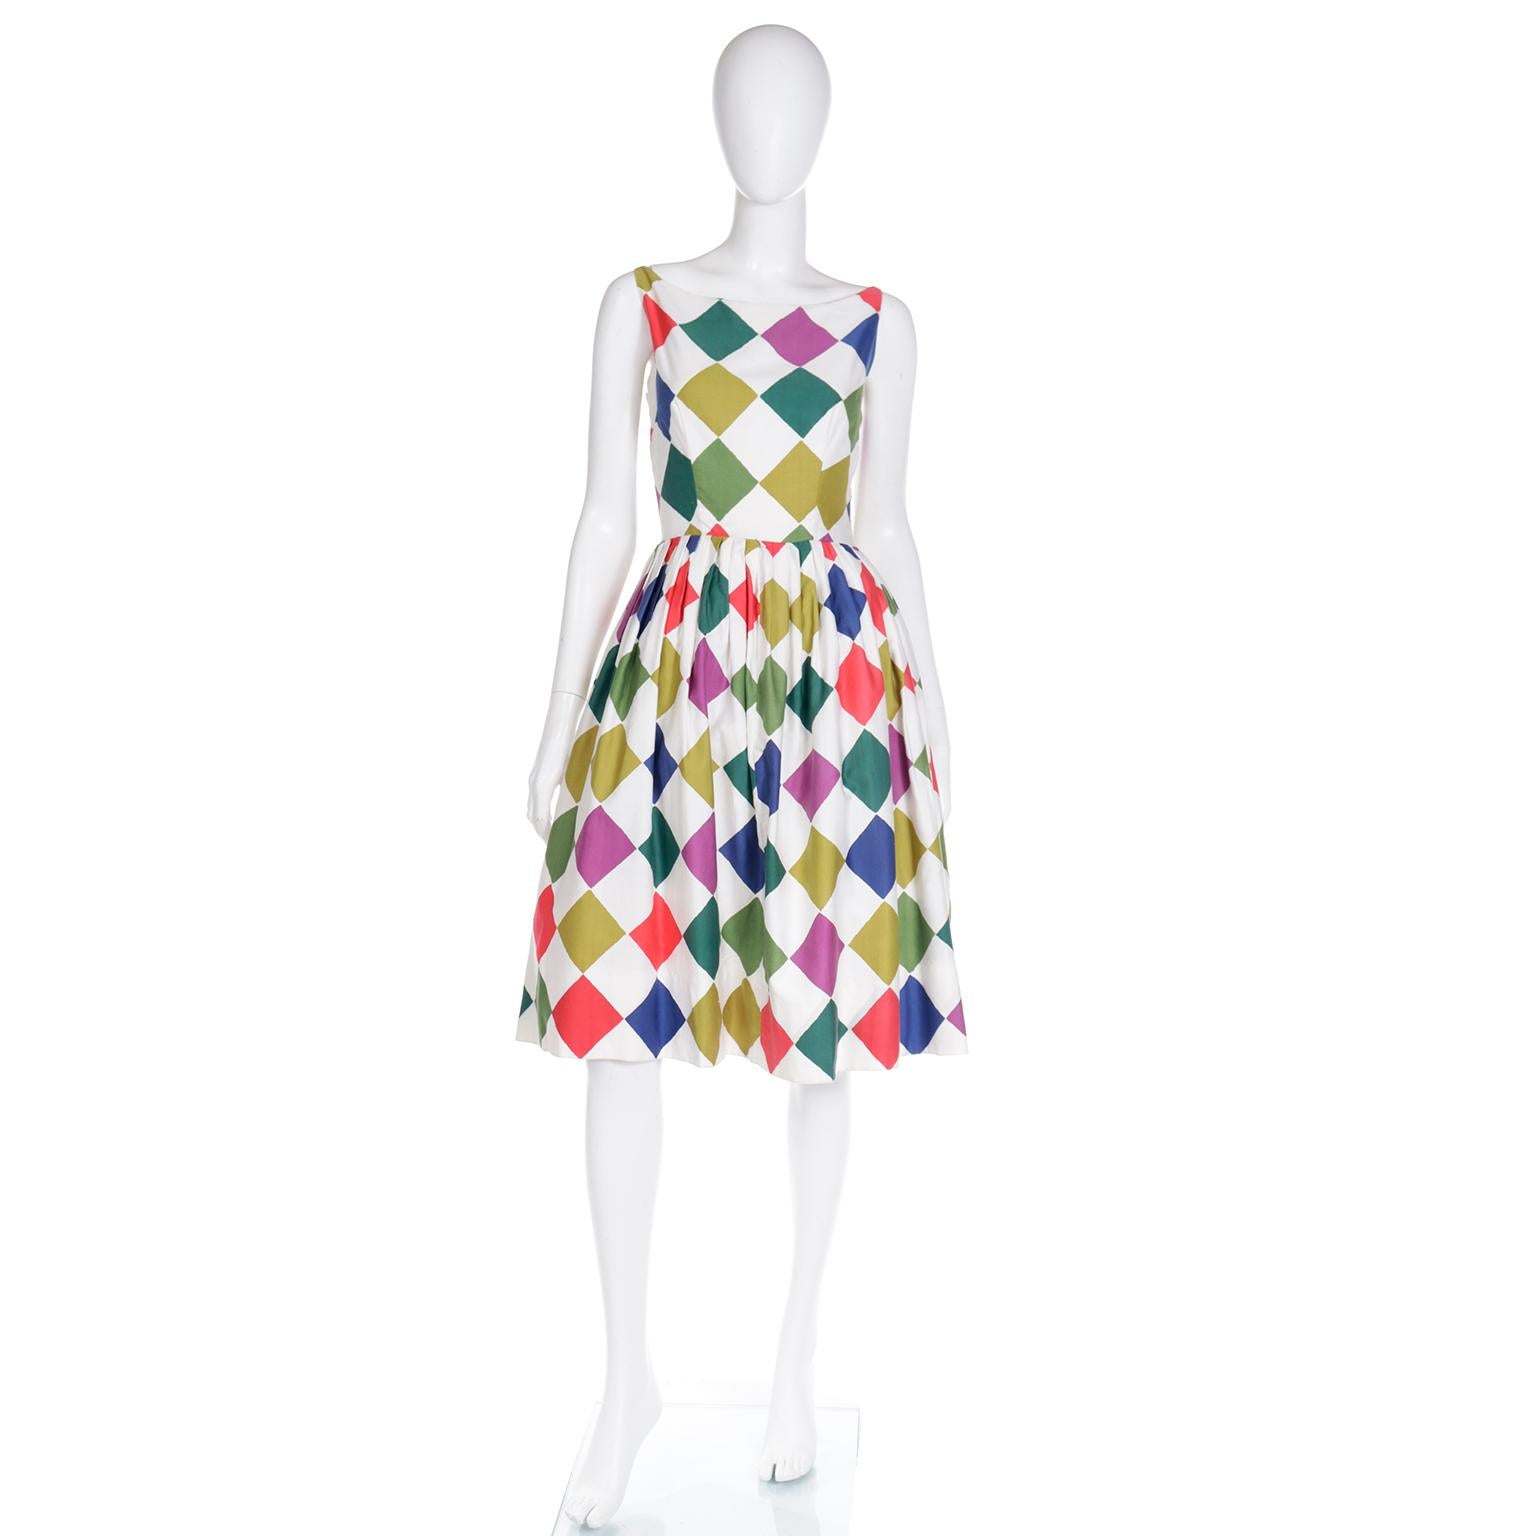 This vintage 1960's day dress is in a bold colorful diamond print. We love vintage dresses in unique prints and this one would be a really fun addition to your Summer wardrobe!

The dress is cotton and has a fitted bodice with a bateau necklne and a